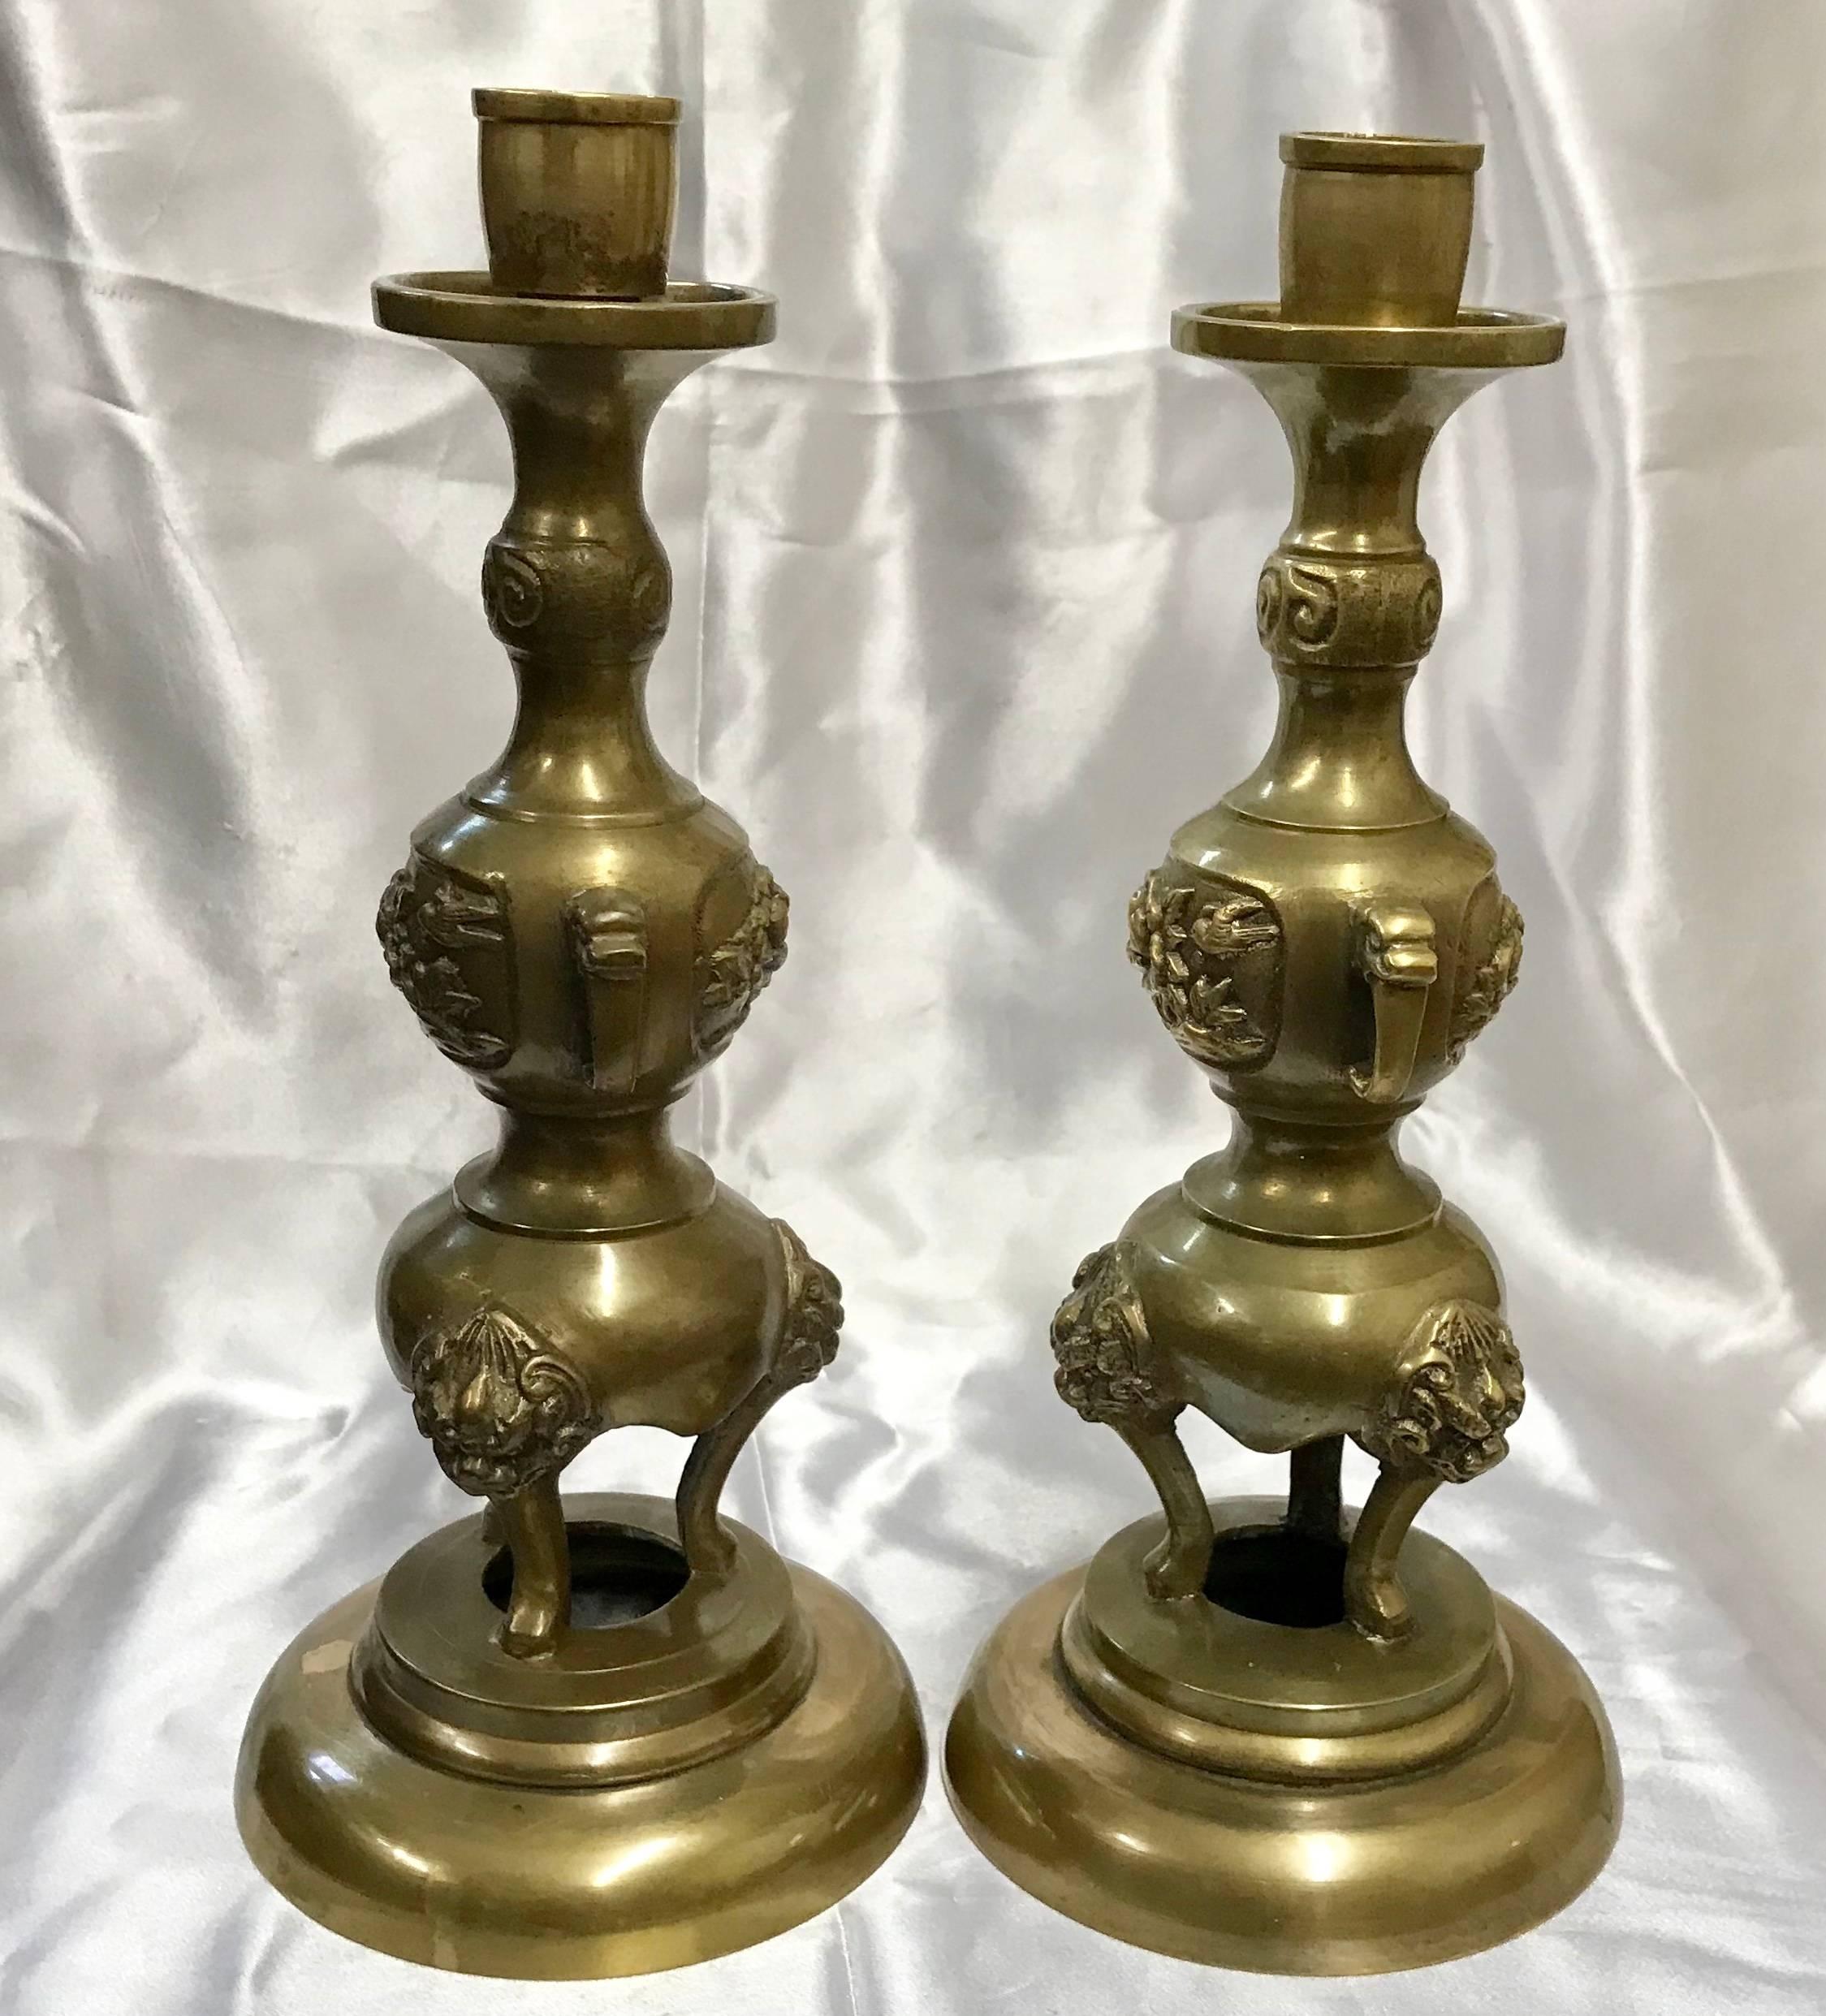 We are offering a pair of heavy cast brass candlesticks with several personalities. Starting at the smooth base, you will find three legs with each supporting the head of a griffin. Further up, you will find dainty flowers bordered by handles with